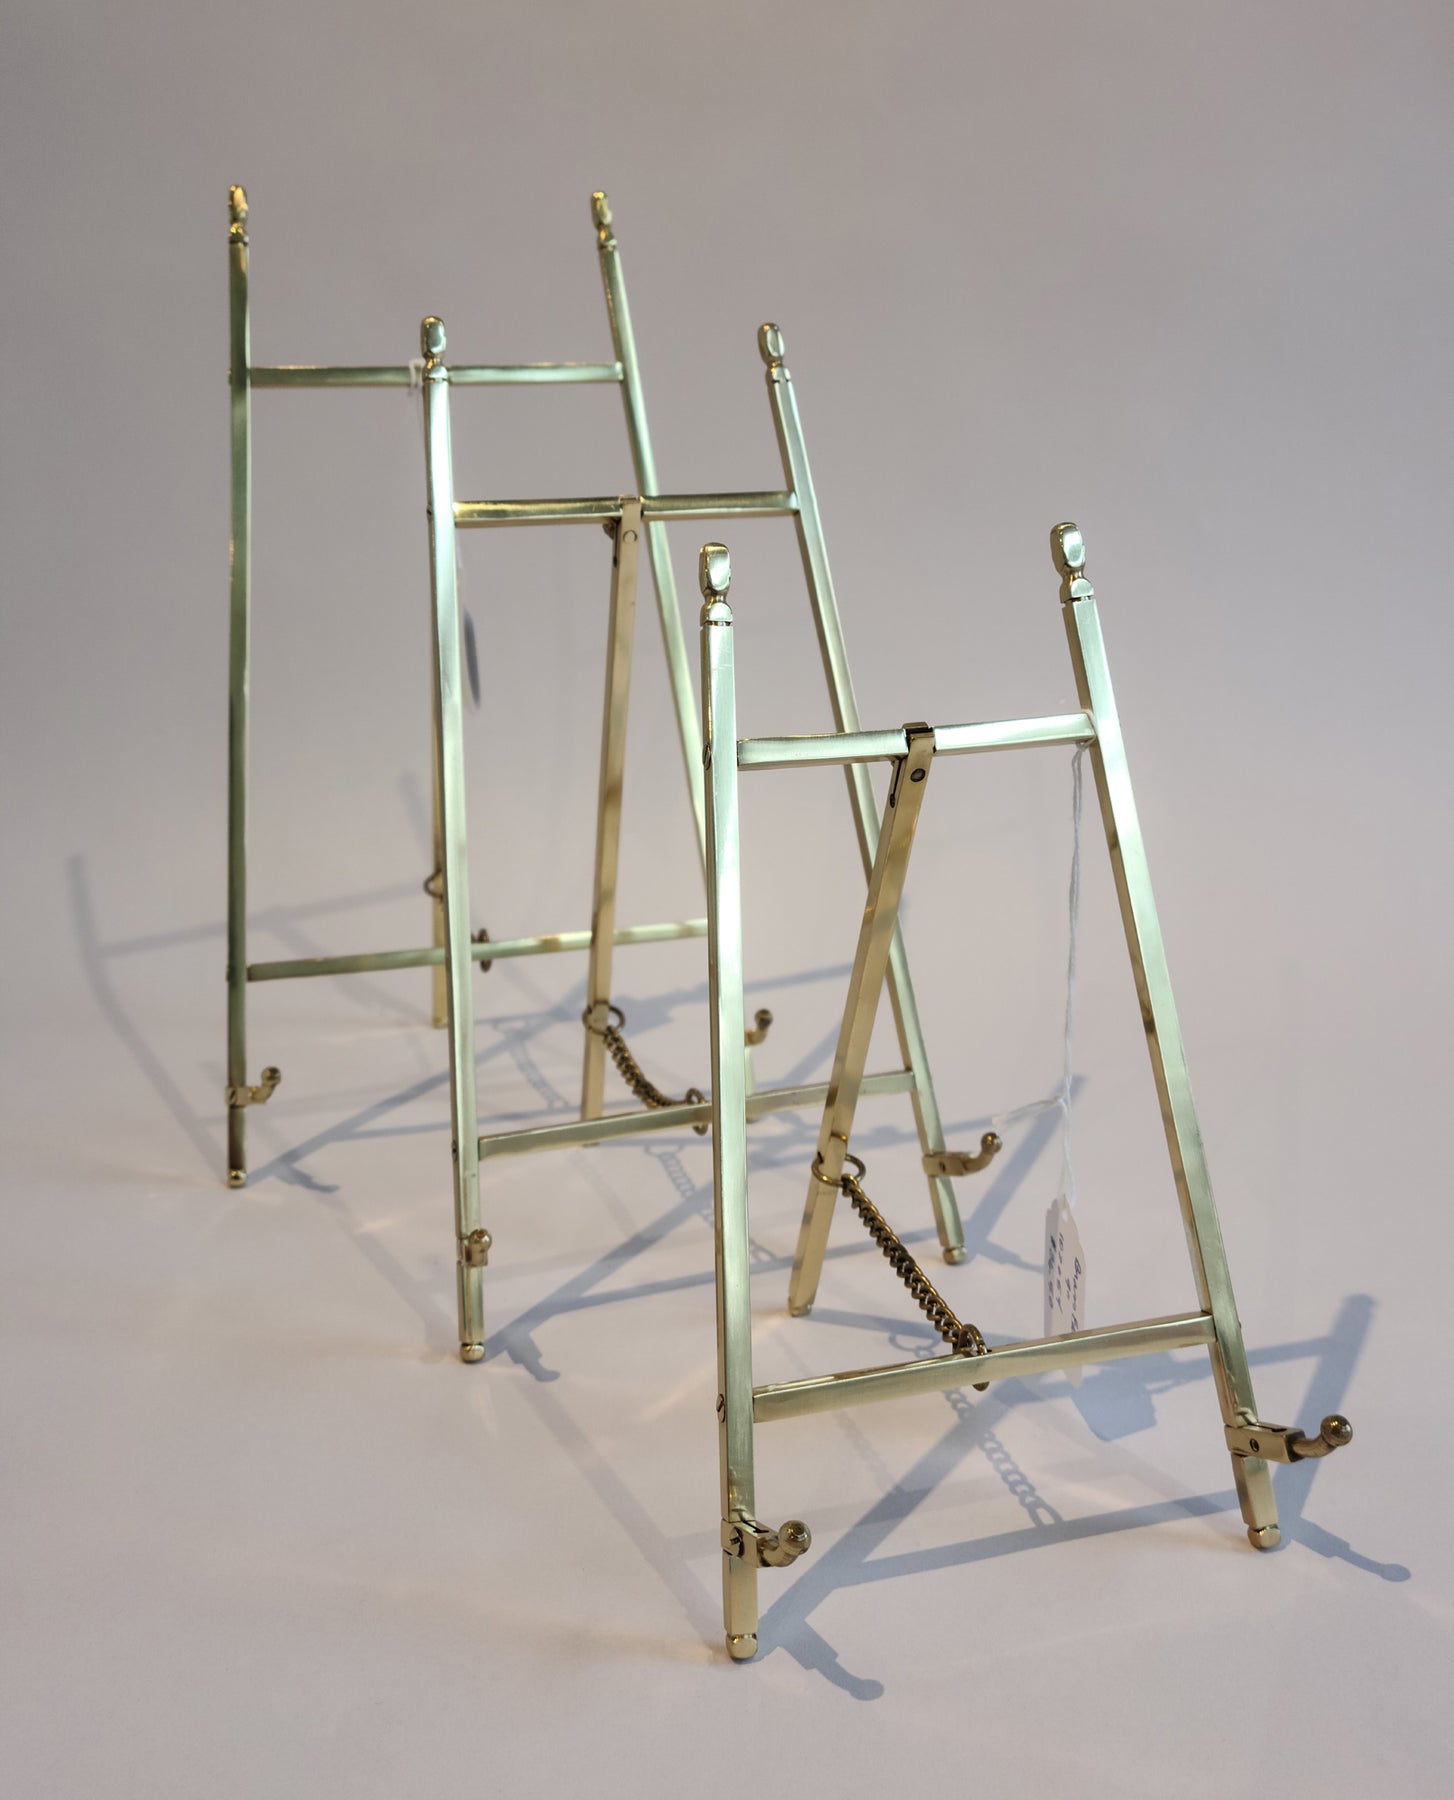 Brass Easels, Decorative Display Easels (7 Inches High)